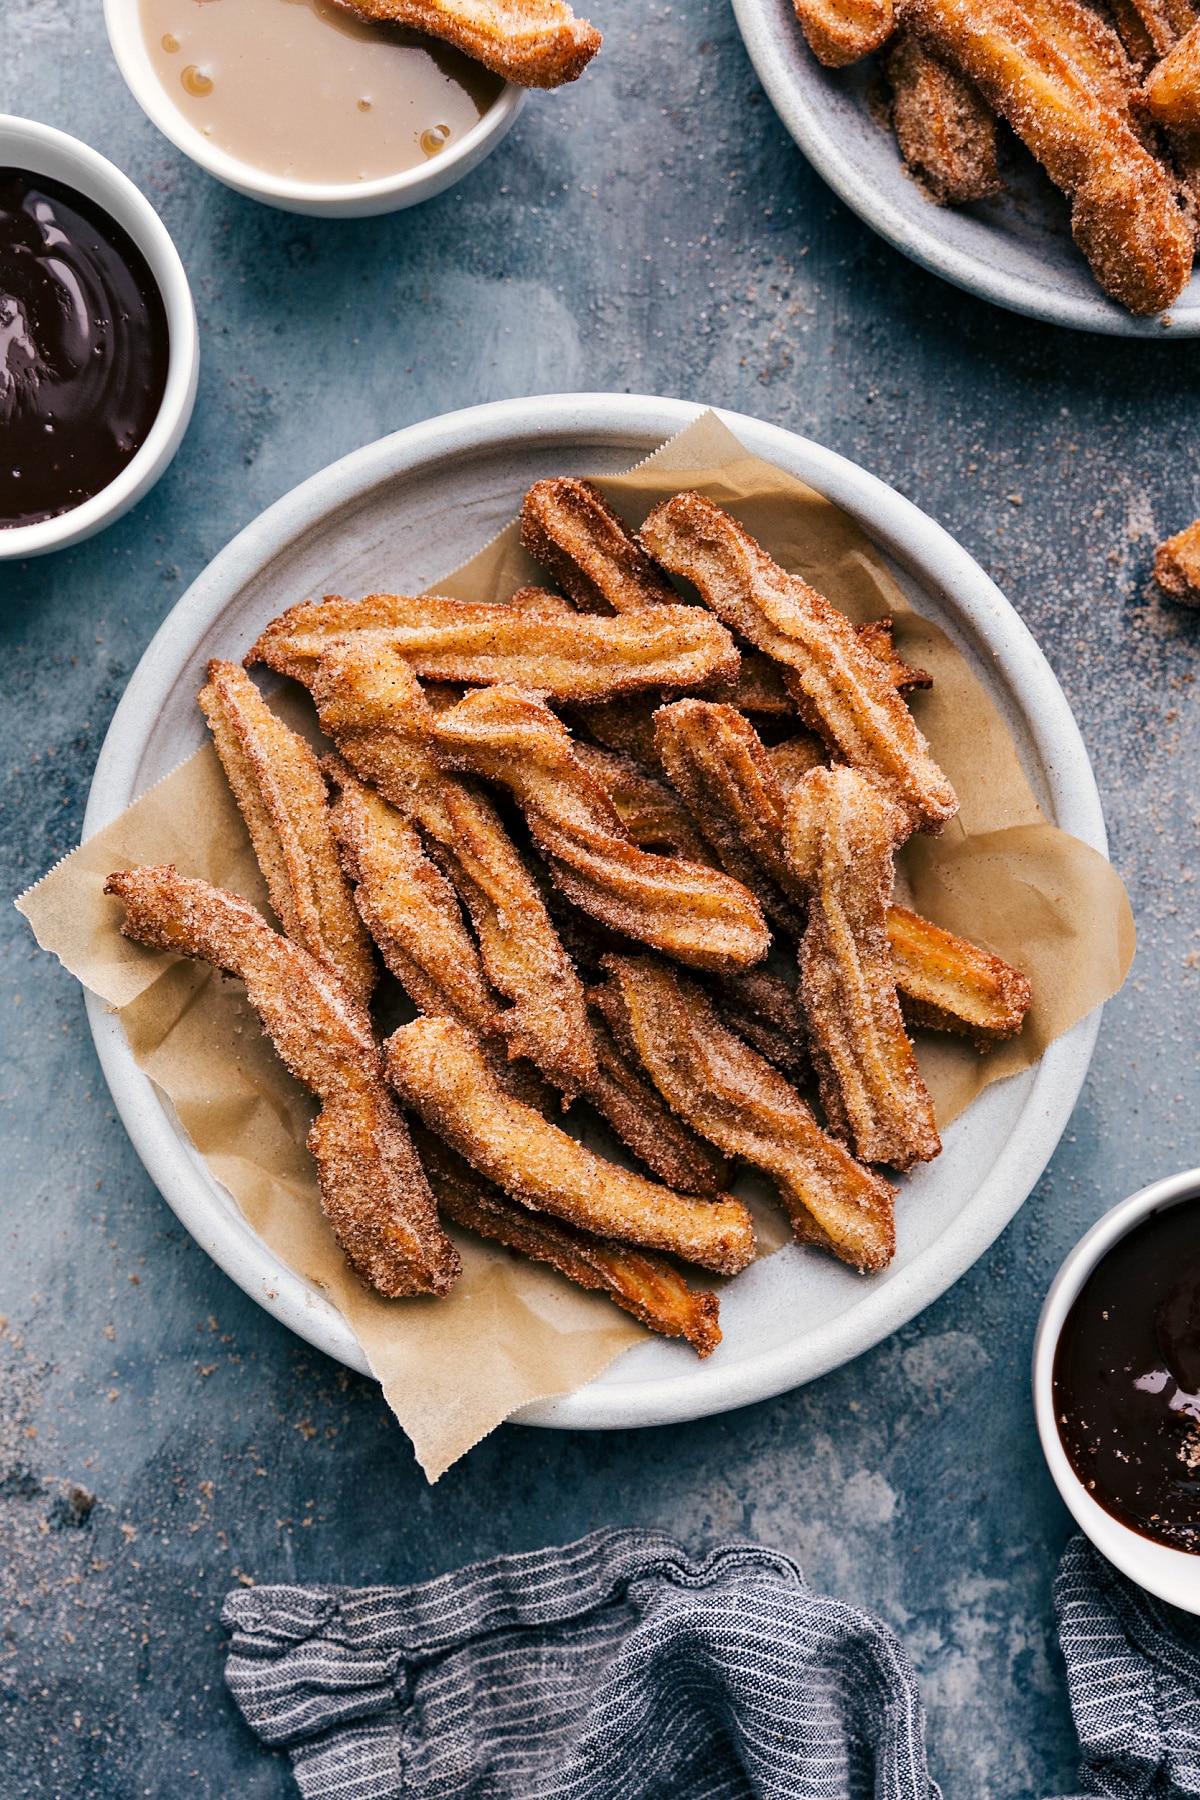 Plate of churros served with a side bowl of rich chocolate sauce.